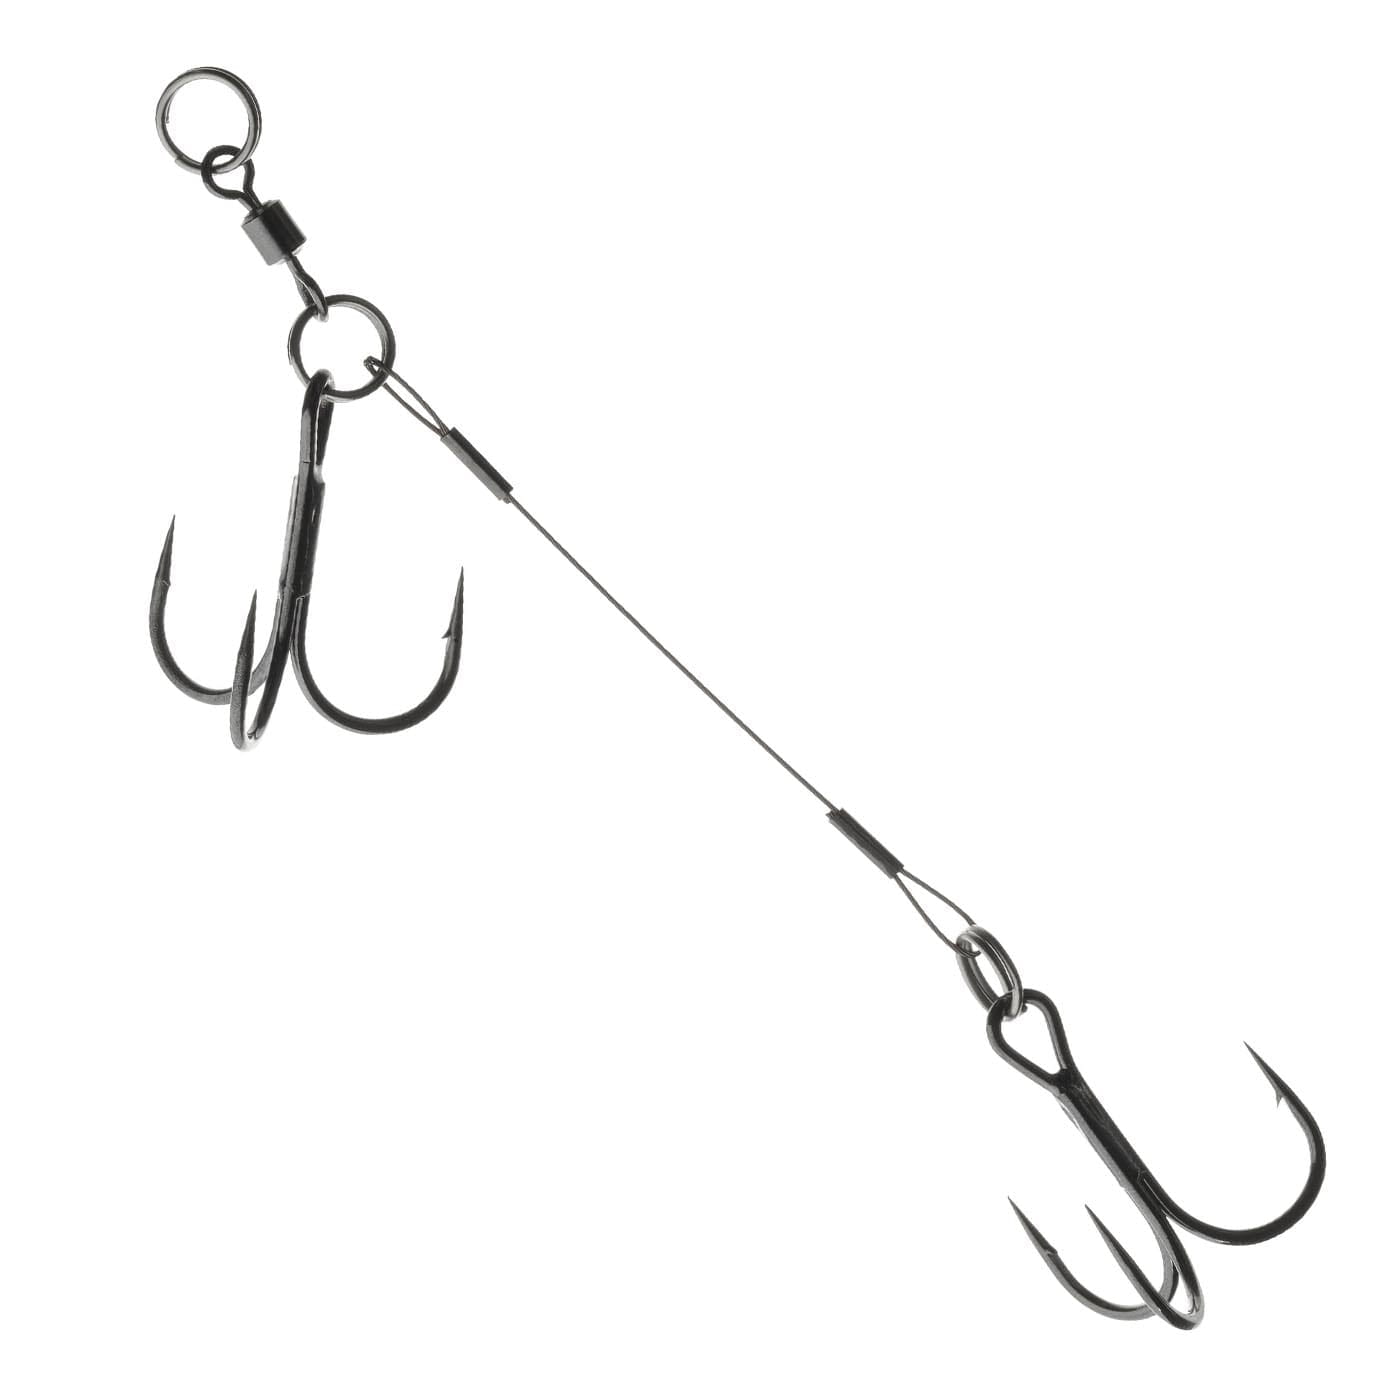 Zebco Topic Carp Hooks Size 6 Nickel Pack of 15